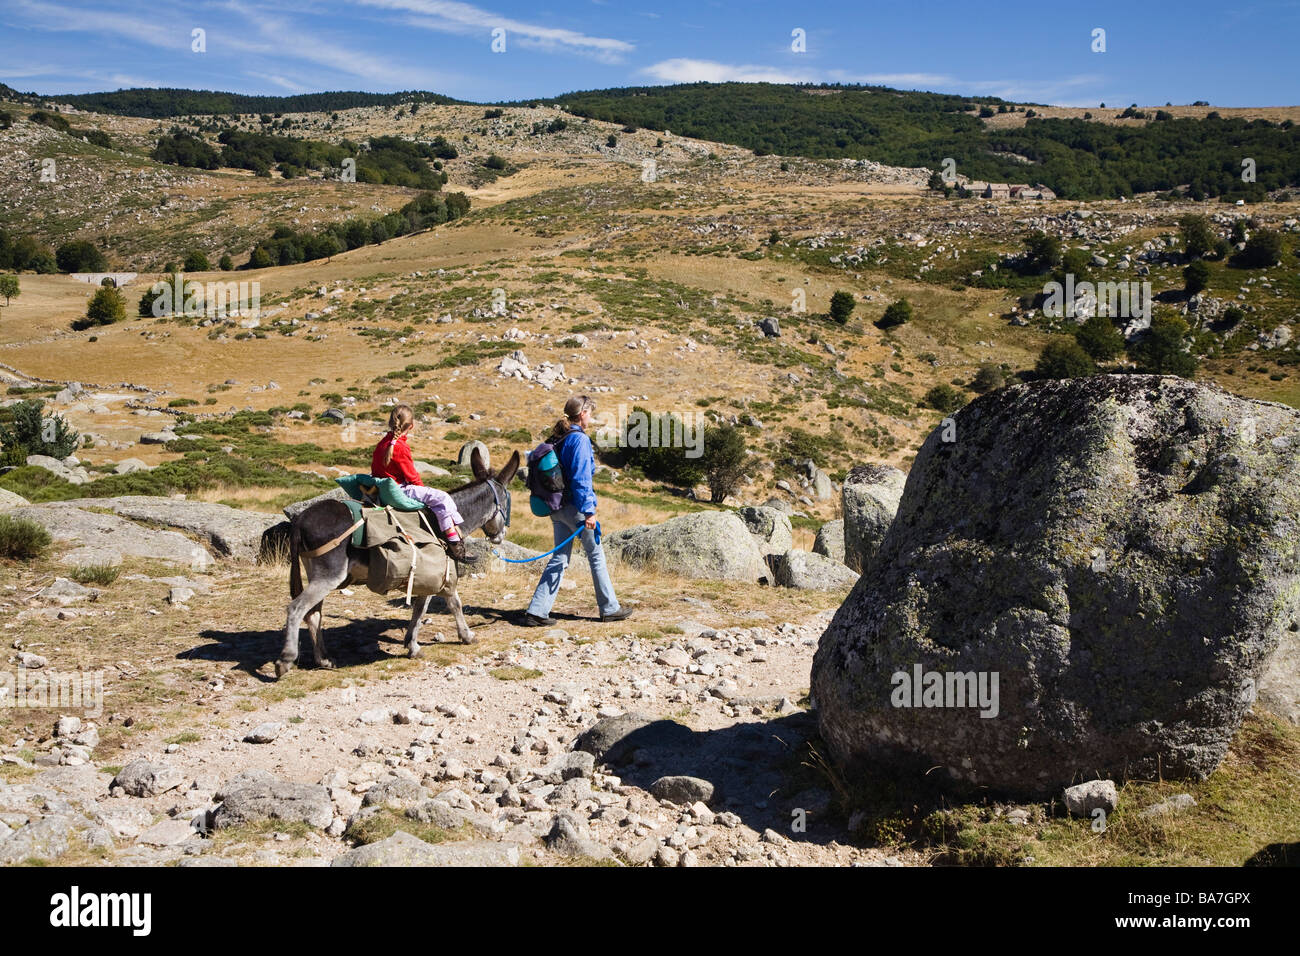 Mother and child on a hiking tour, Family hiking trip with a donkey in the Cevennes mountains, Cevennen, France Stock Photo